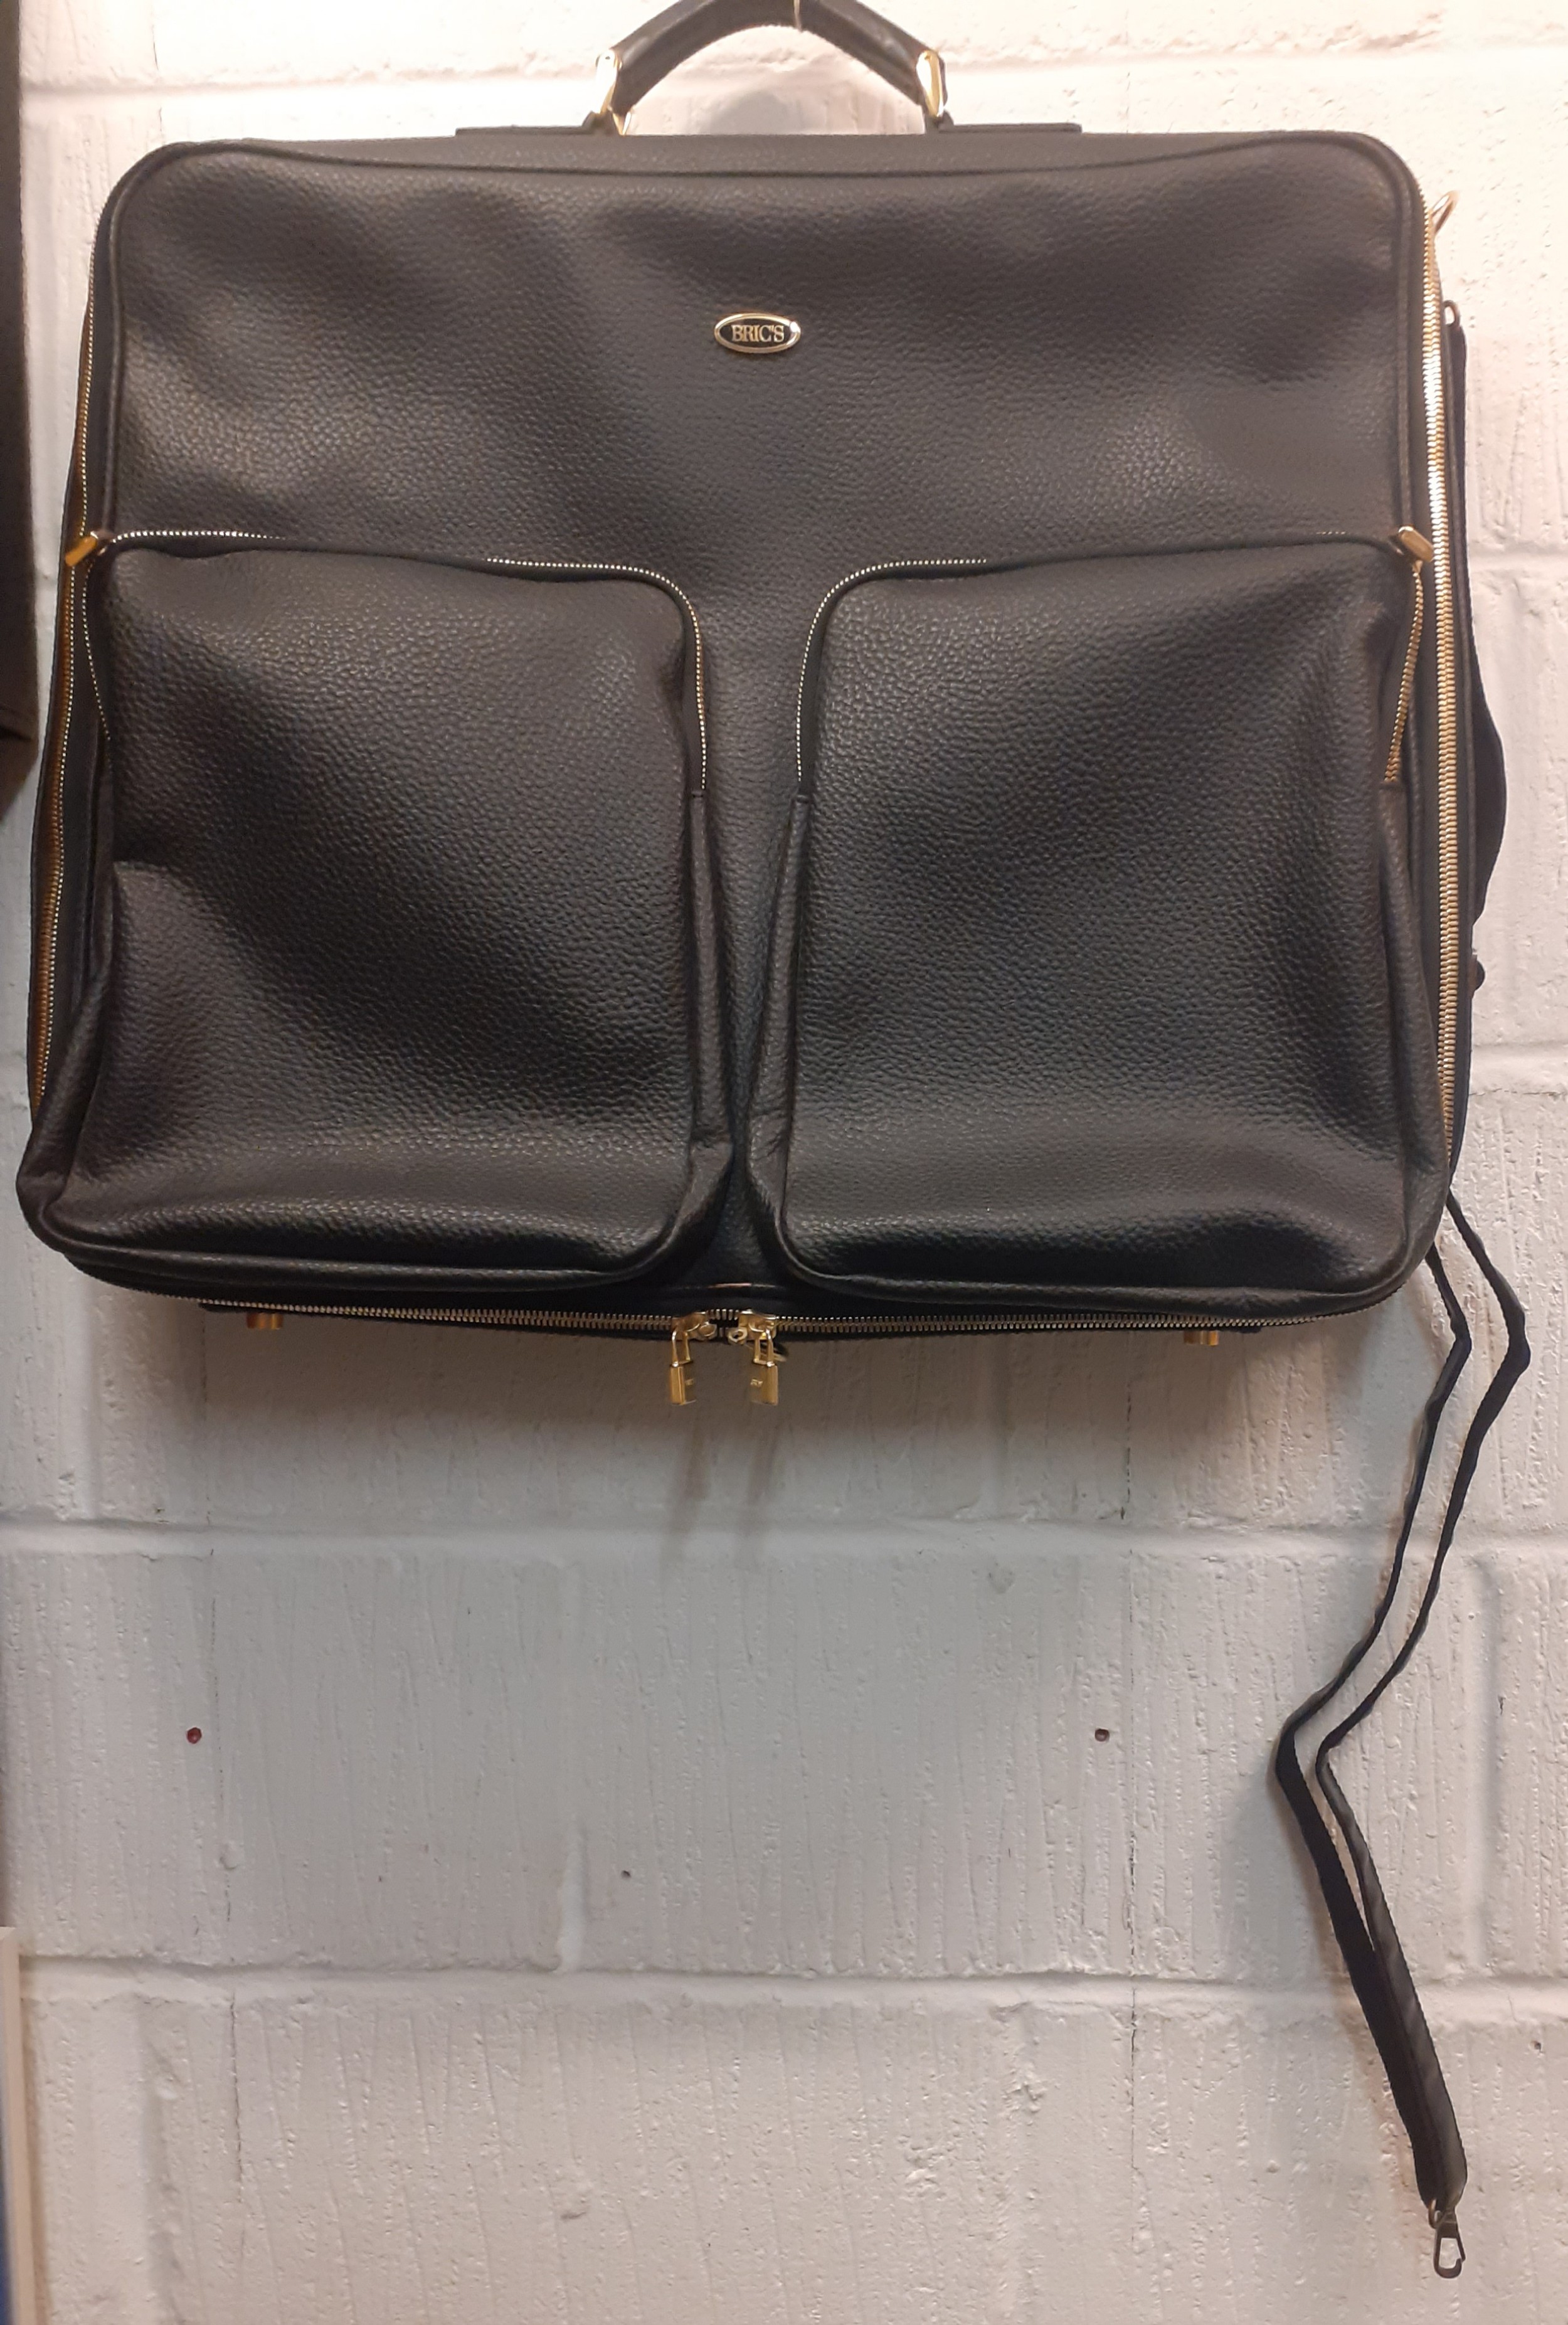 Brics-A large black textured leather folding suit carrier/weekend bag 18"high x 23"wide folded and - Image 6 of 9